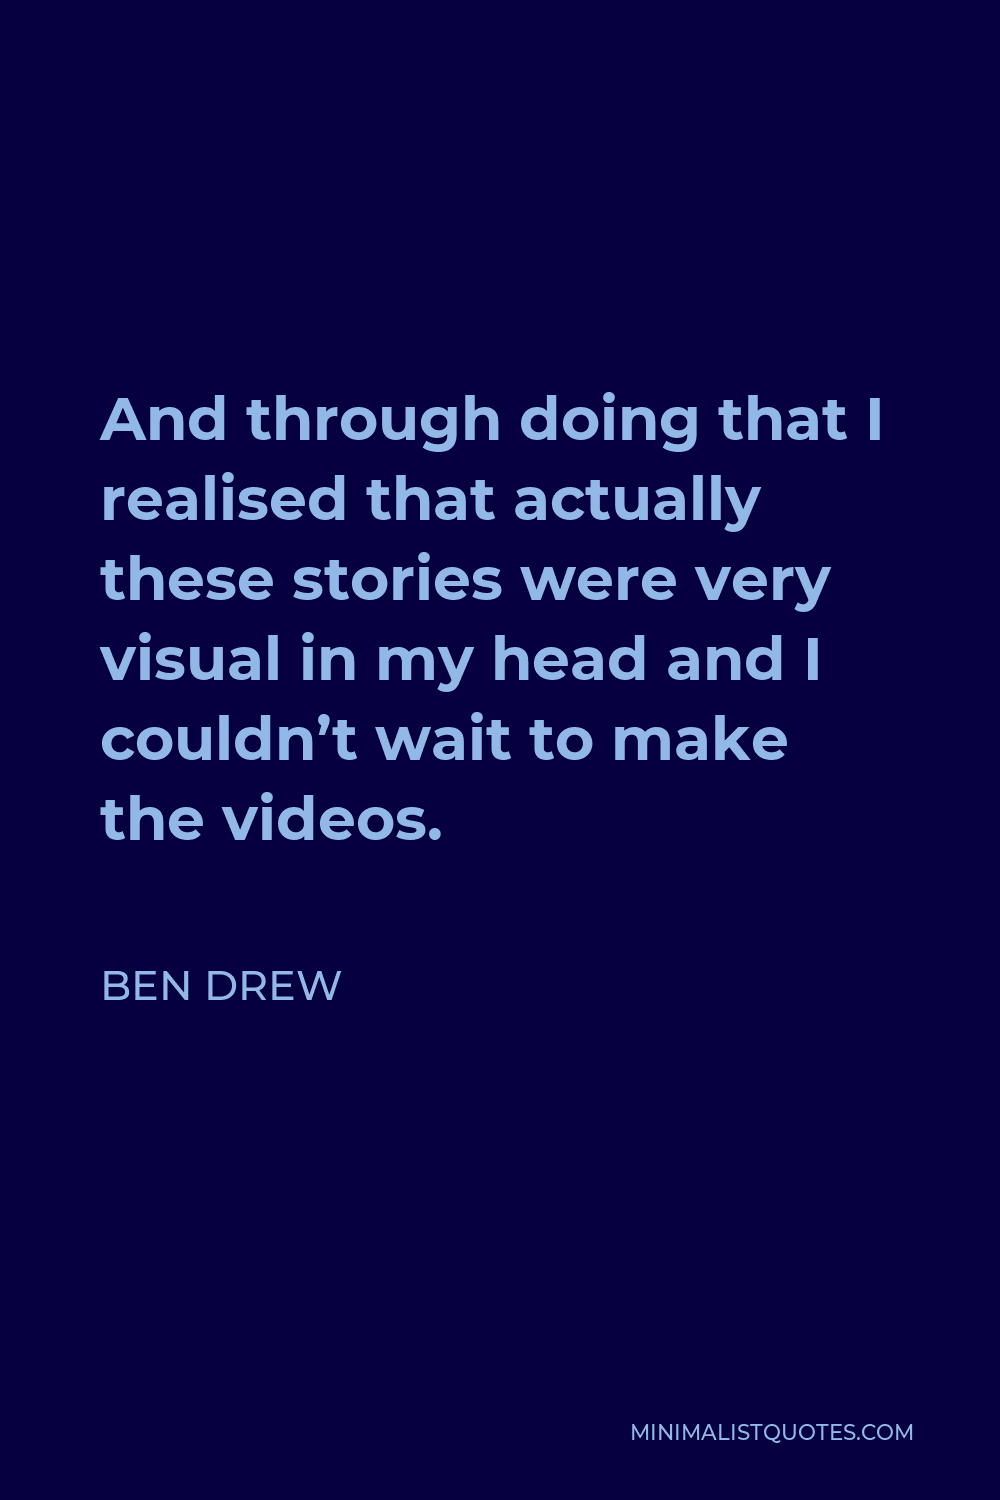 Ben Drew Quote - And through doing that I realised that actually these stories were very visual in my head and I couldn’t wait to make the videos.